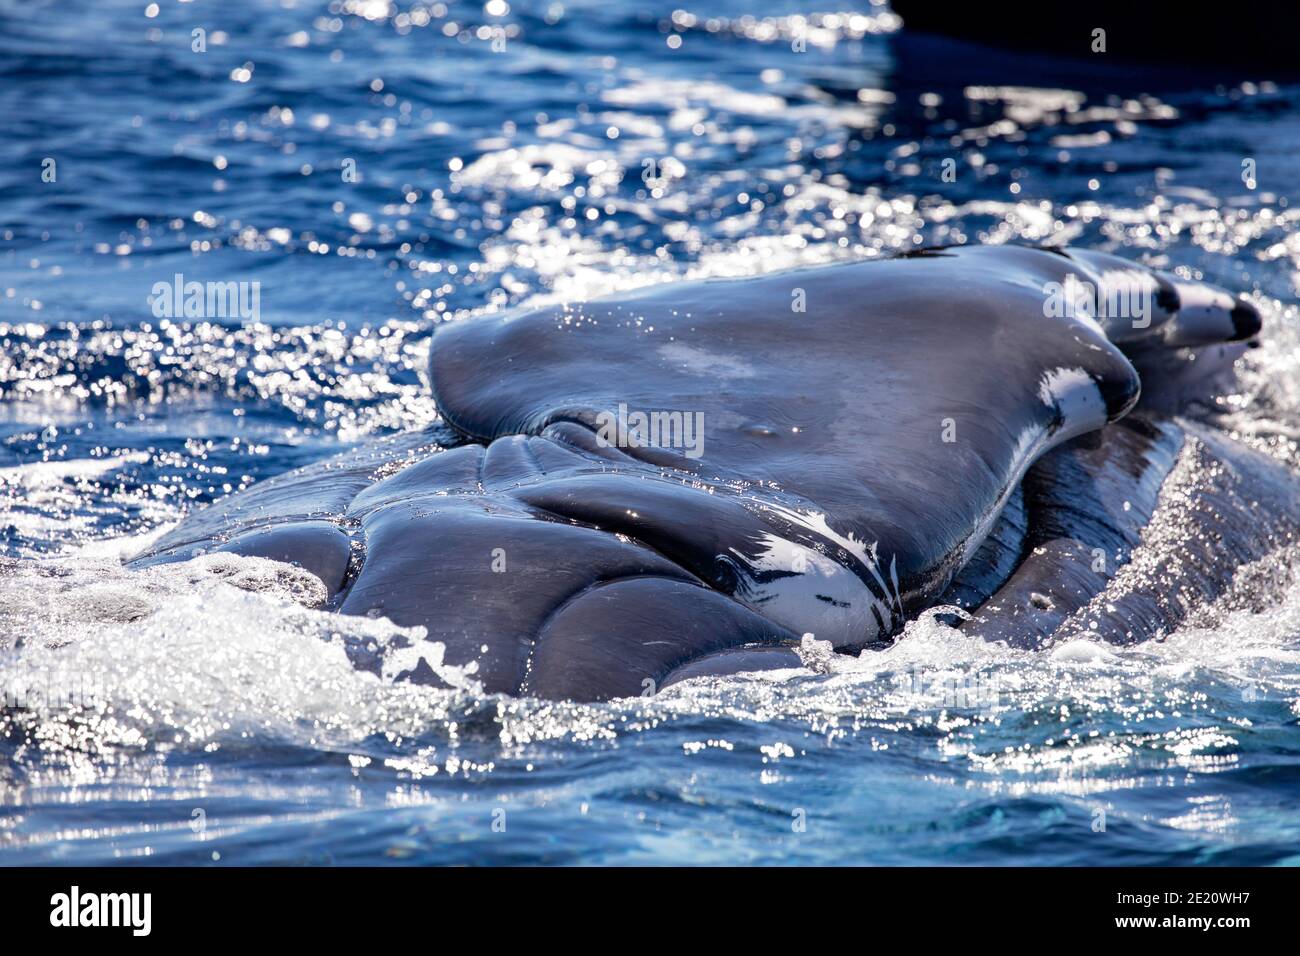 This whale is laying on the surface with its left side out of the water. The view is from the shoulder looking down the length of the pectoral fin. Hu Stock Photo